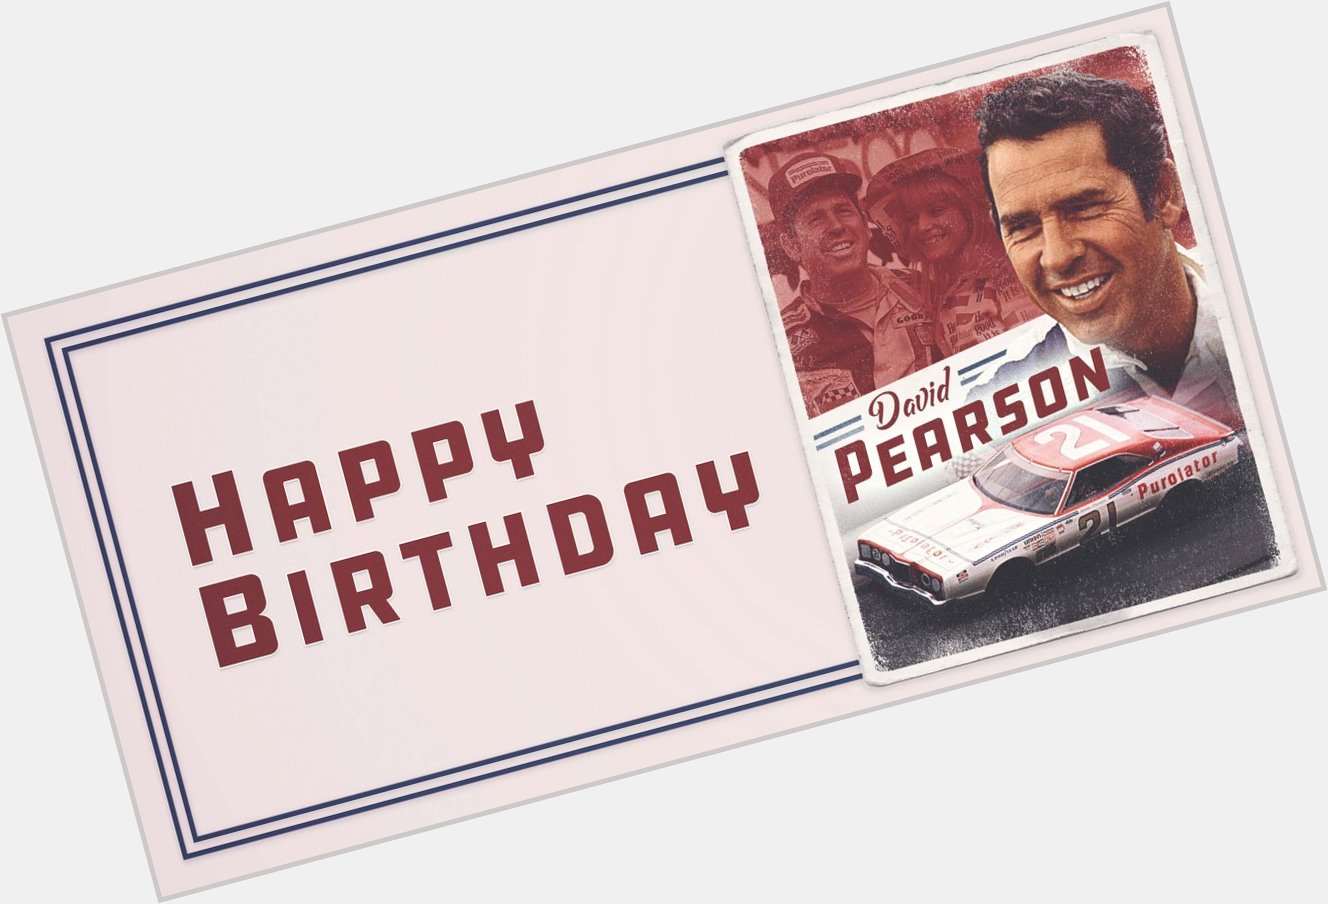 \The Silver Fox\ turns 83 years young today!

Join us in wishing NASCARHall inductee David Pearson a Happy Birthday. 